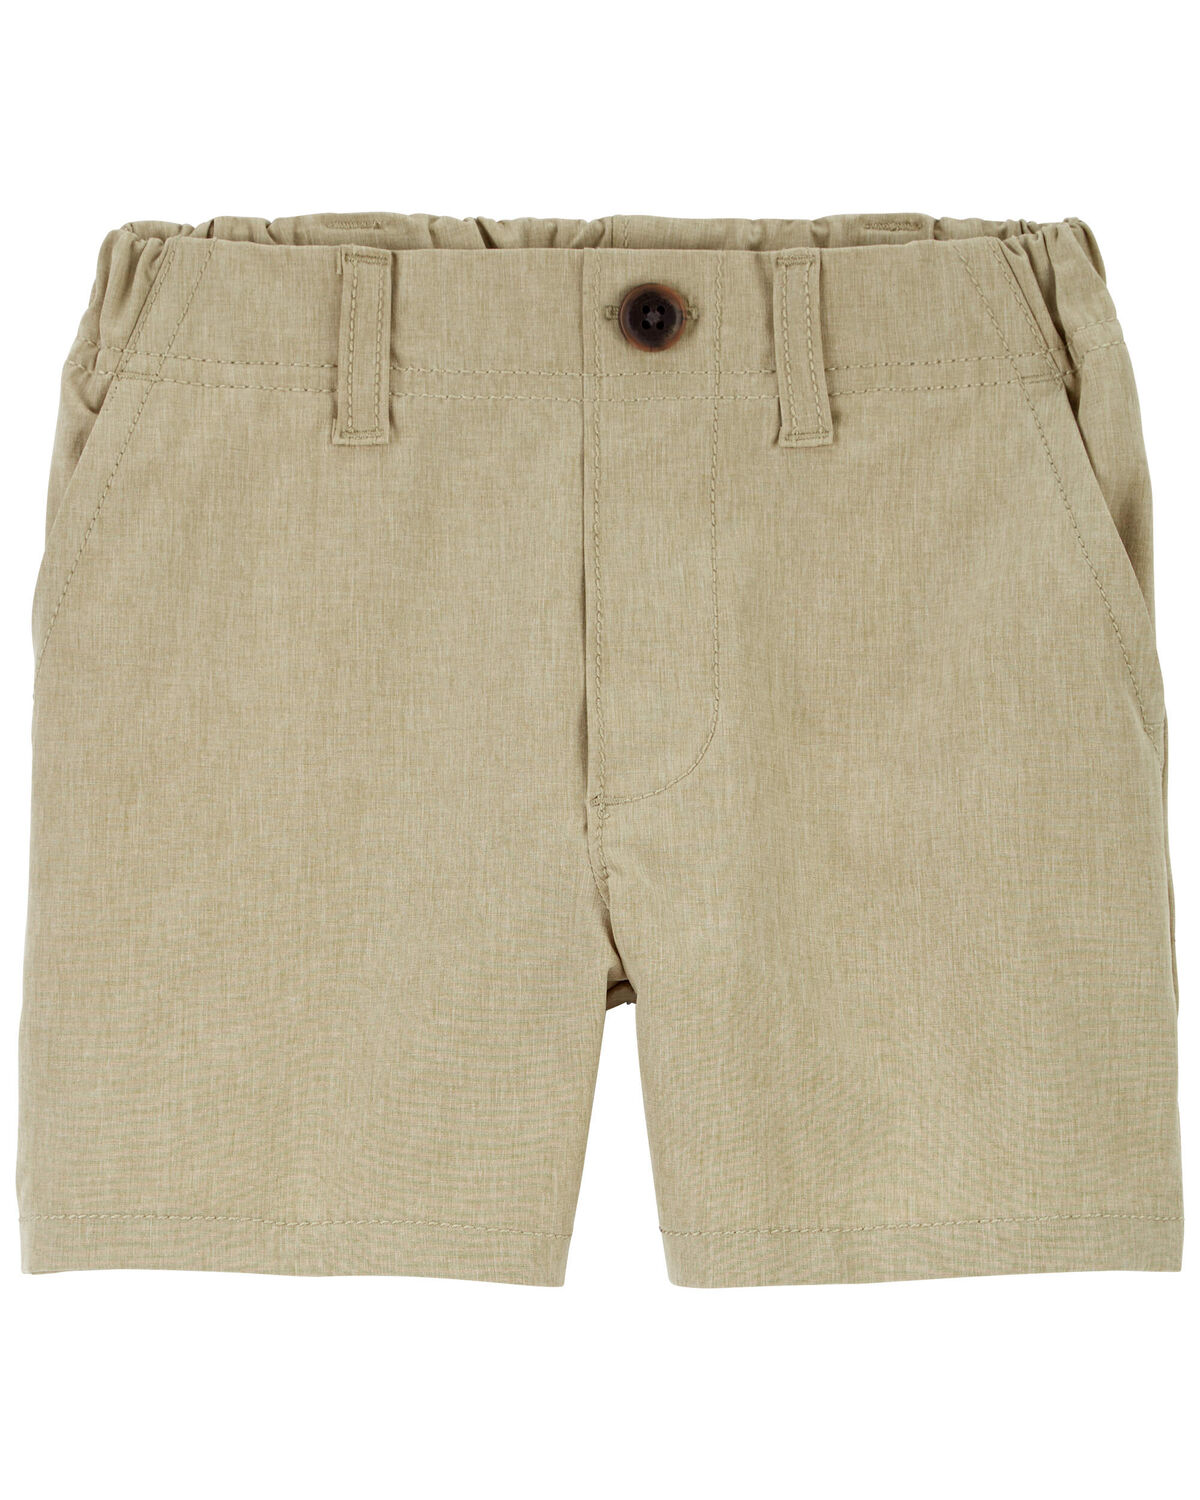 Toddler Lightweight Shorts in Quick Dry Active Poplin
